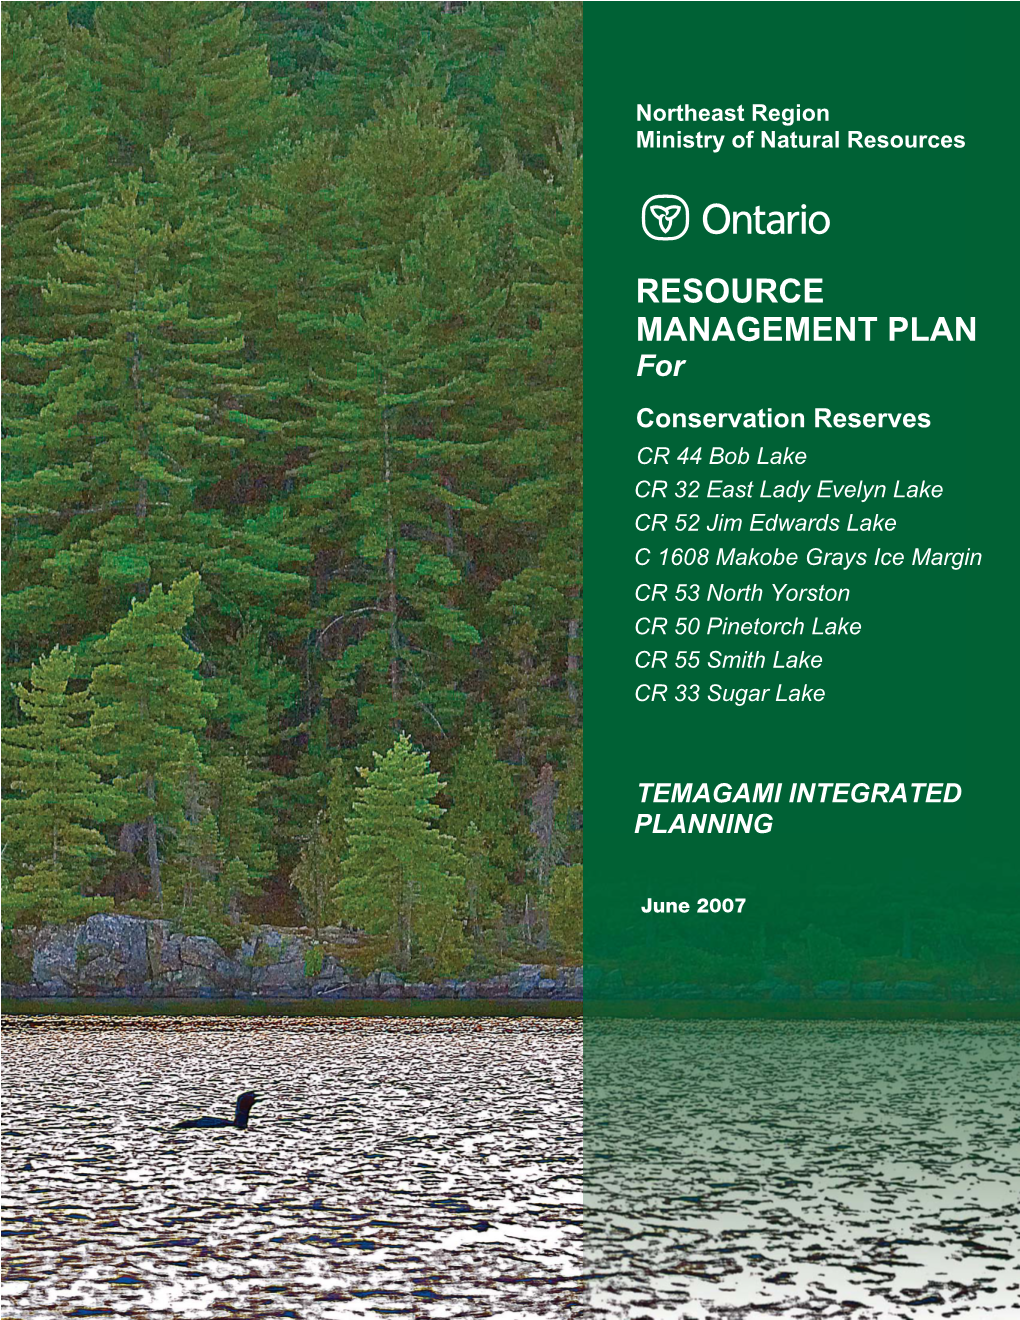 Temagami Integrated Planning